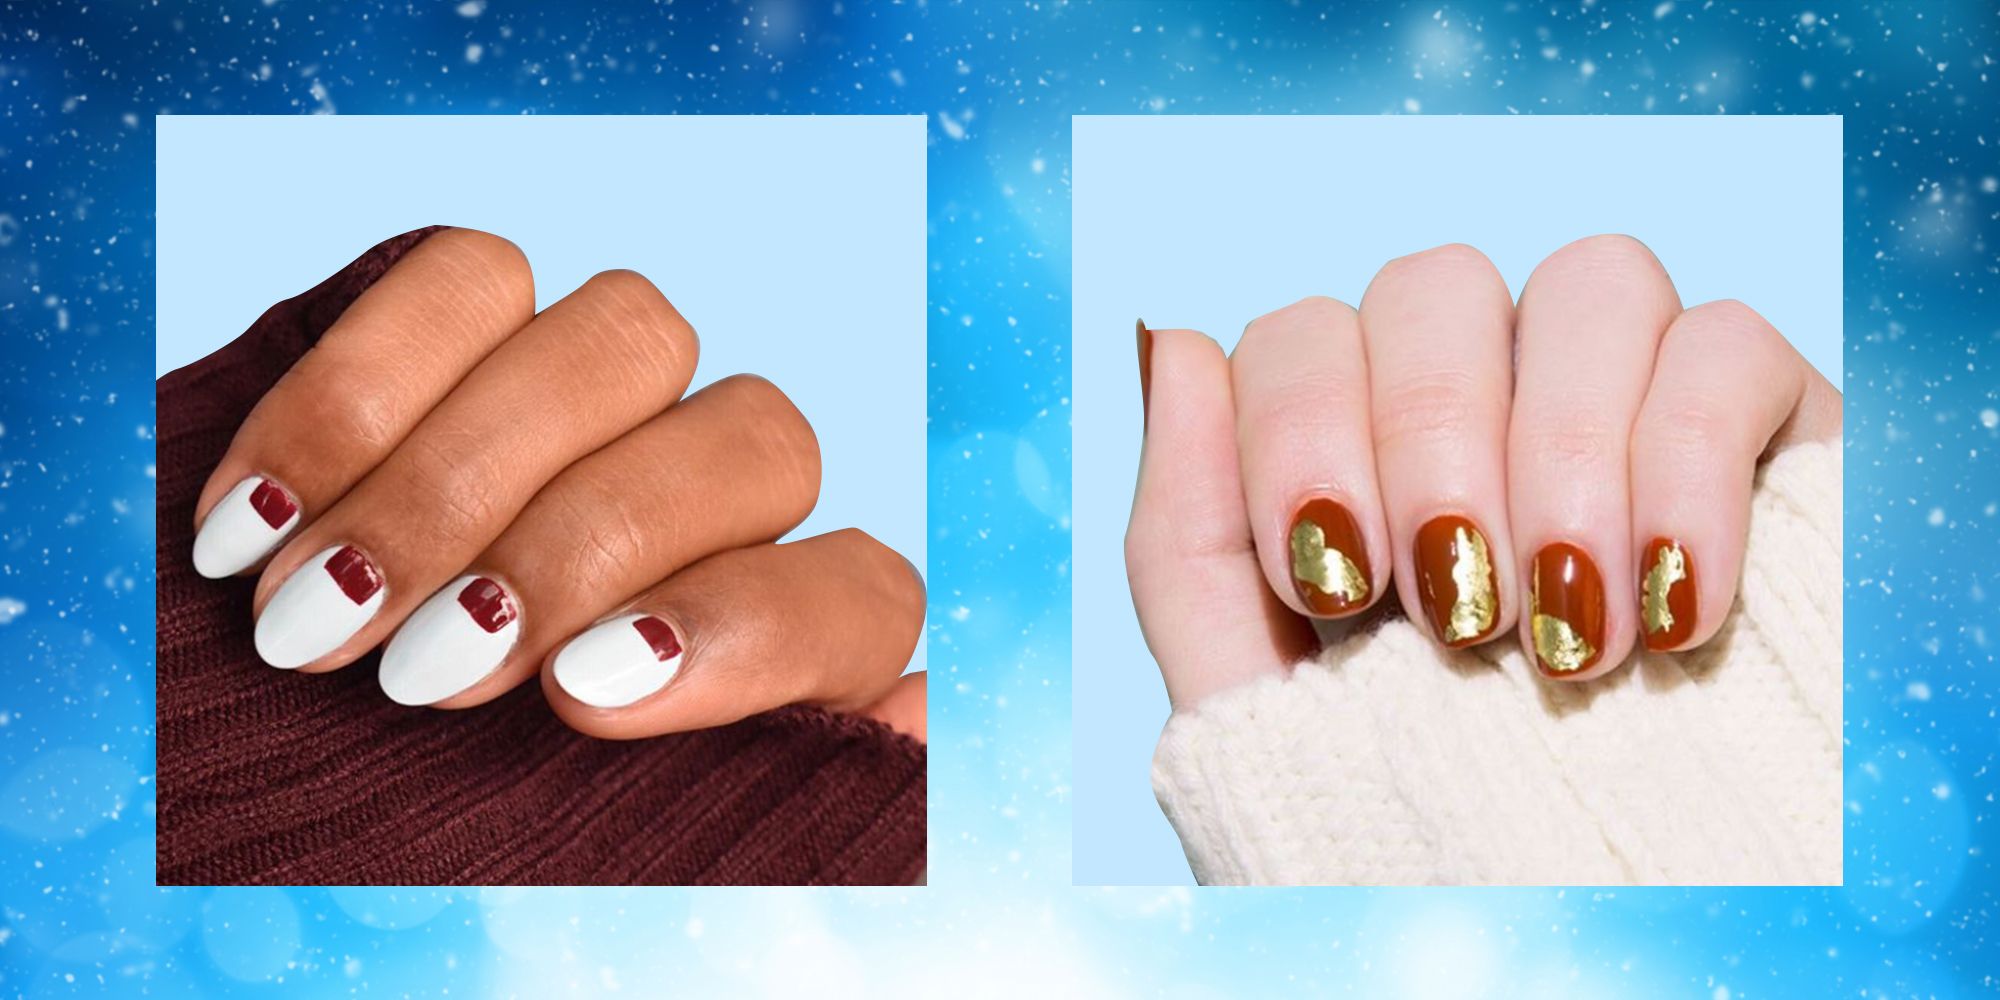 5 Pinterest Nail Art Trends For A Chic Winter Manicure